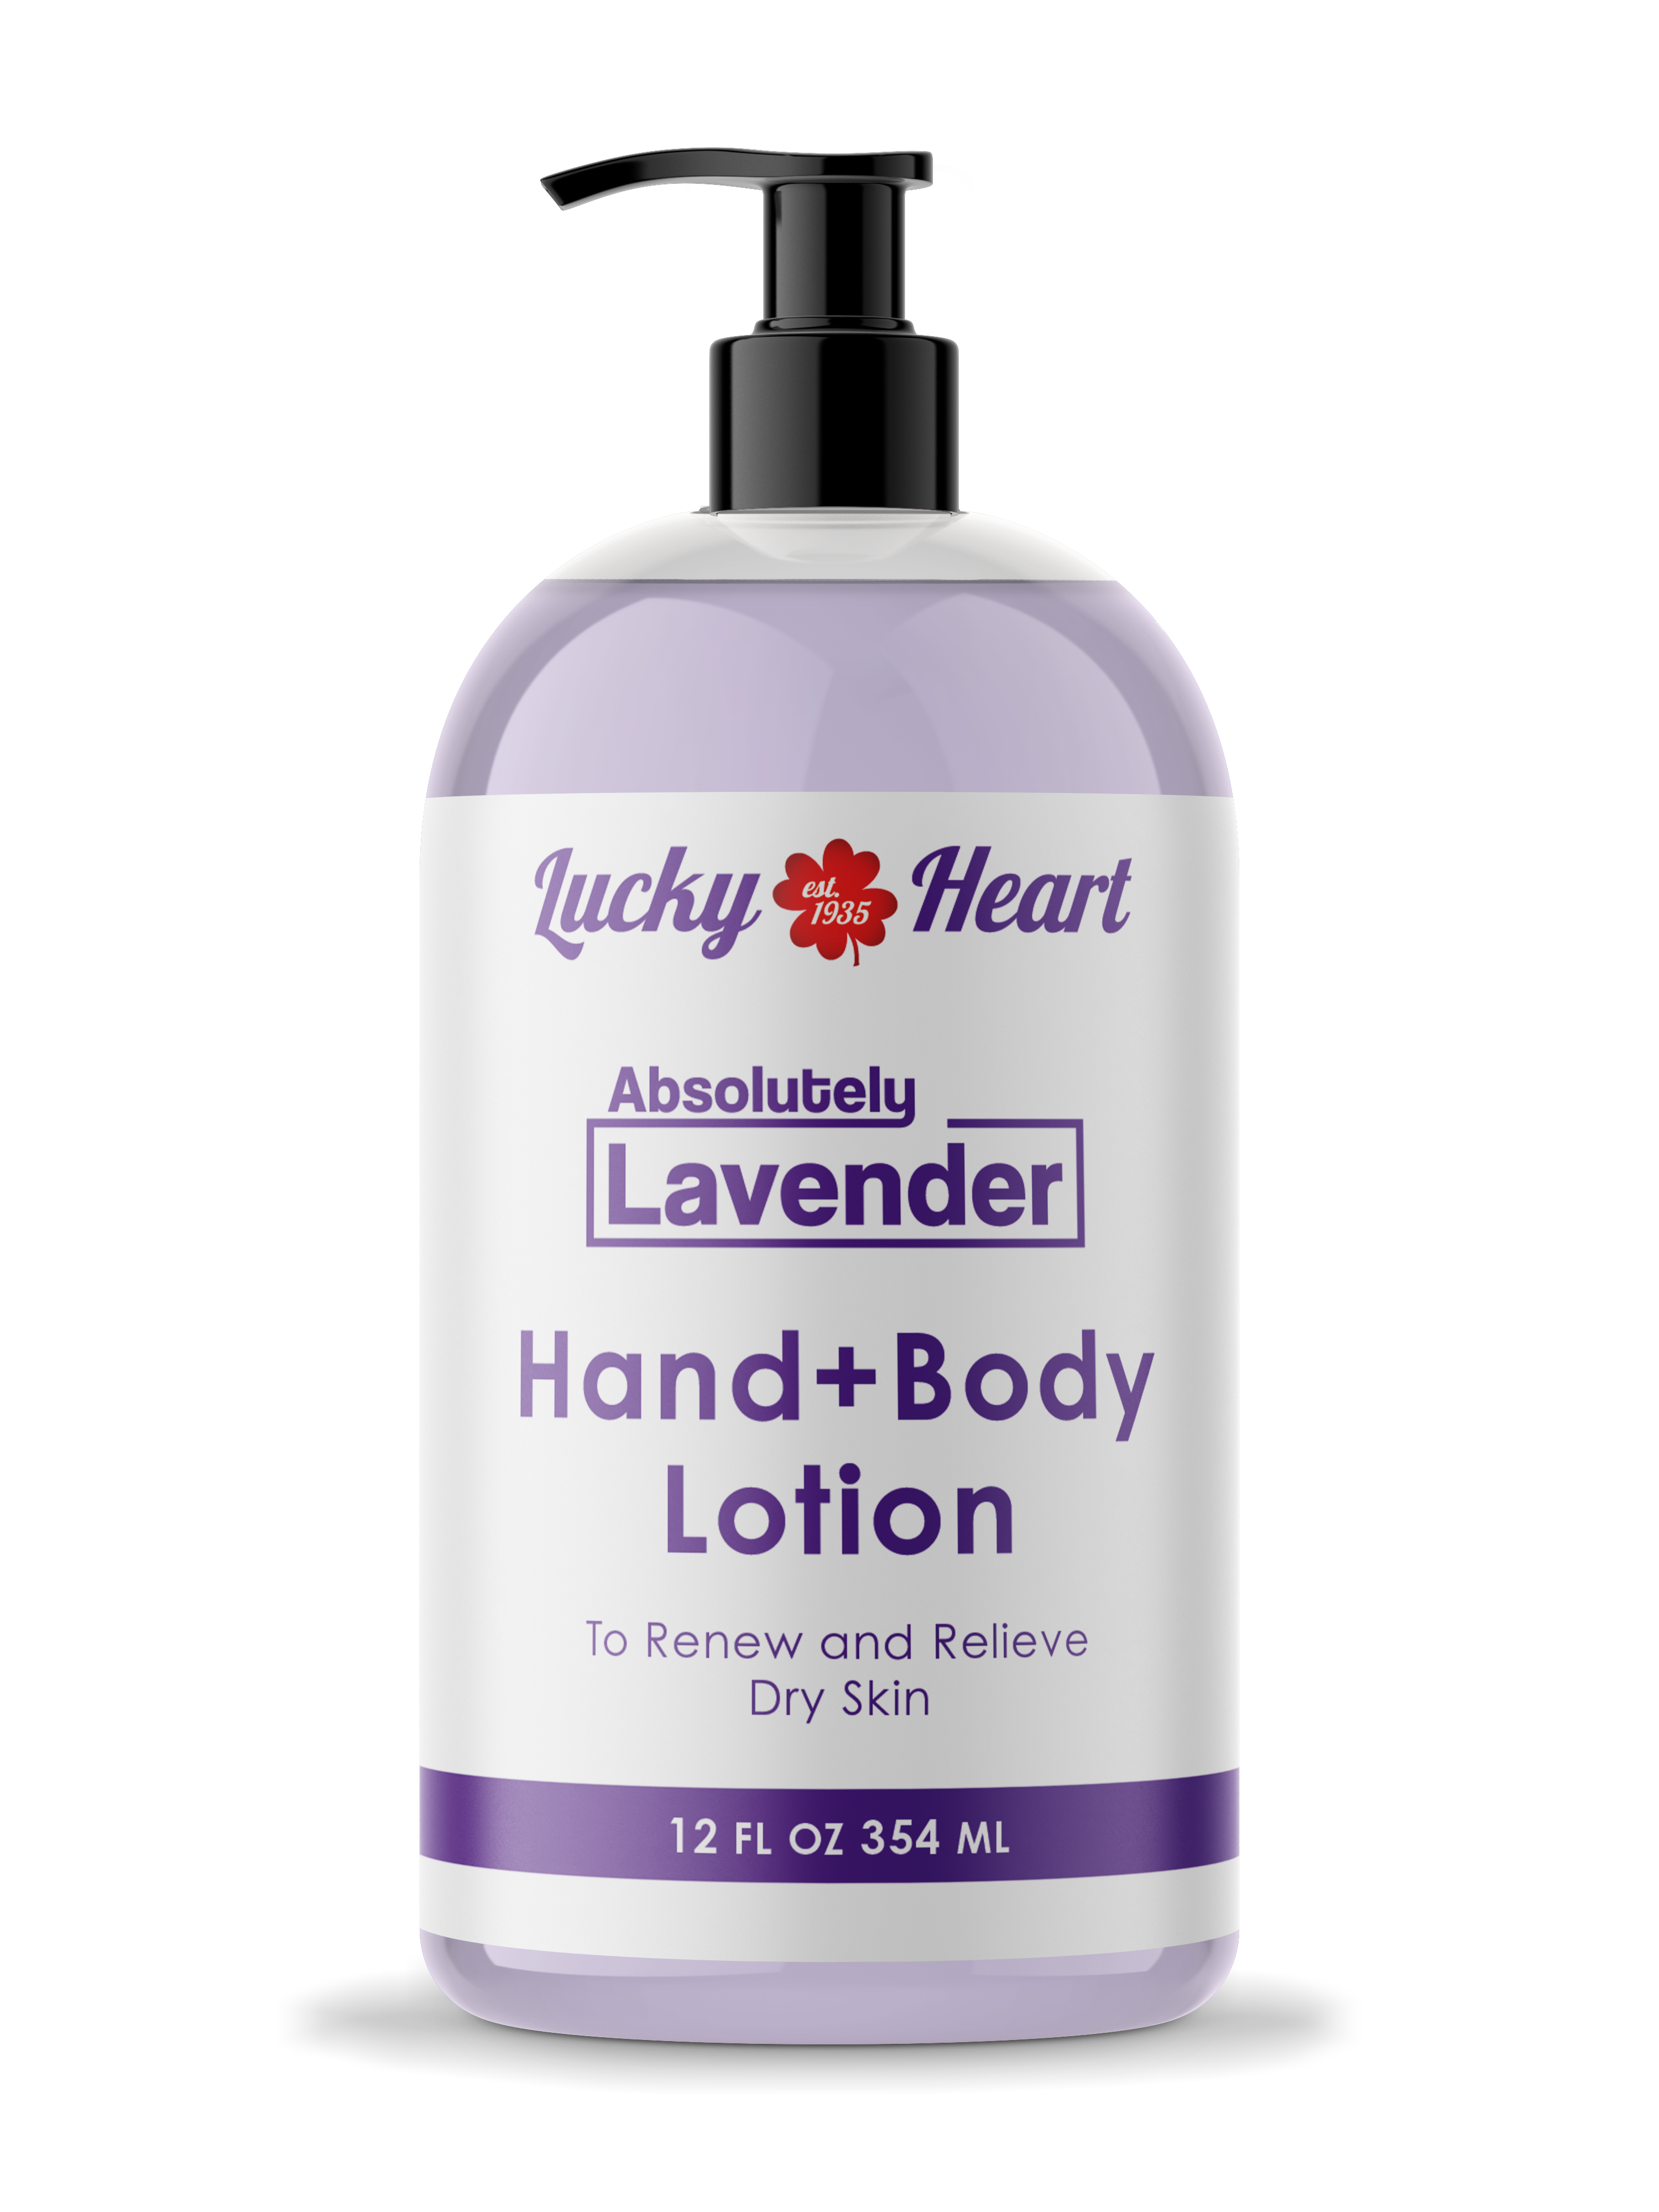 Absolutely Lavender Hand & Body Lotion